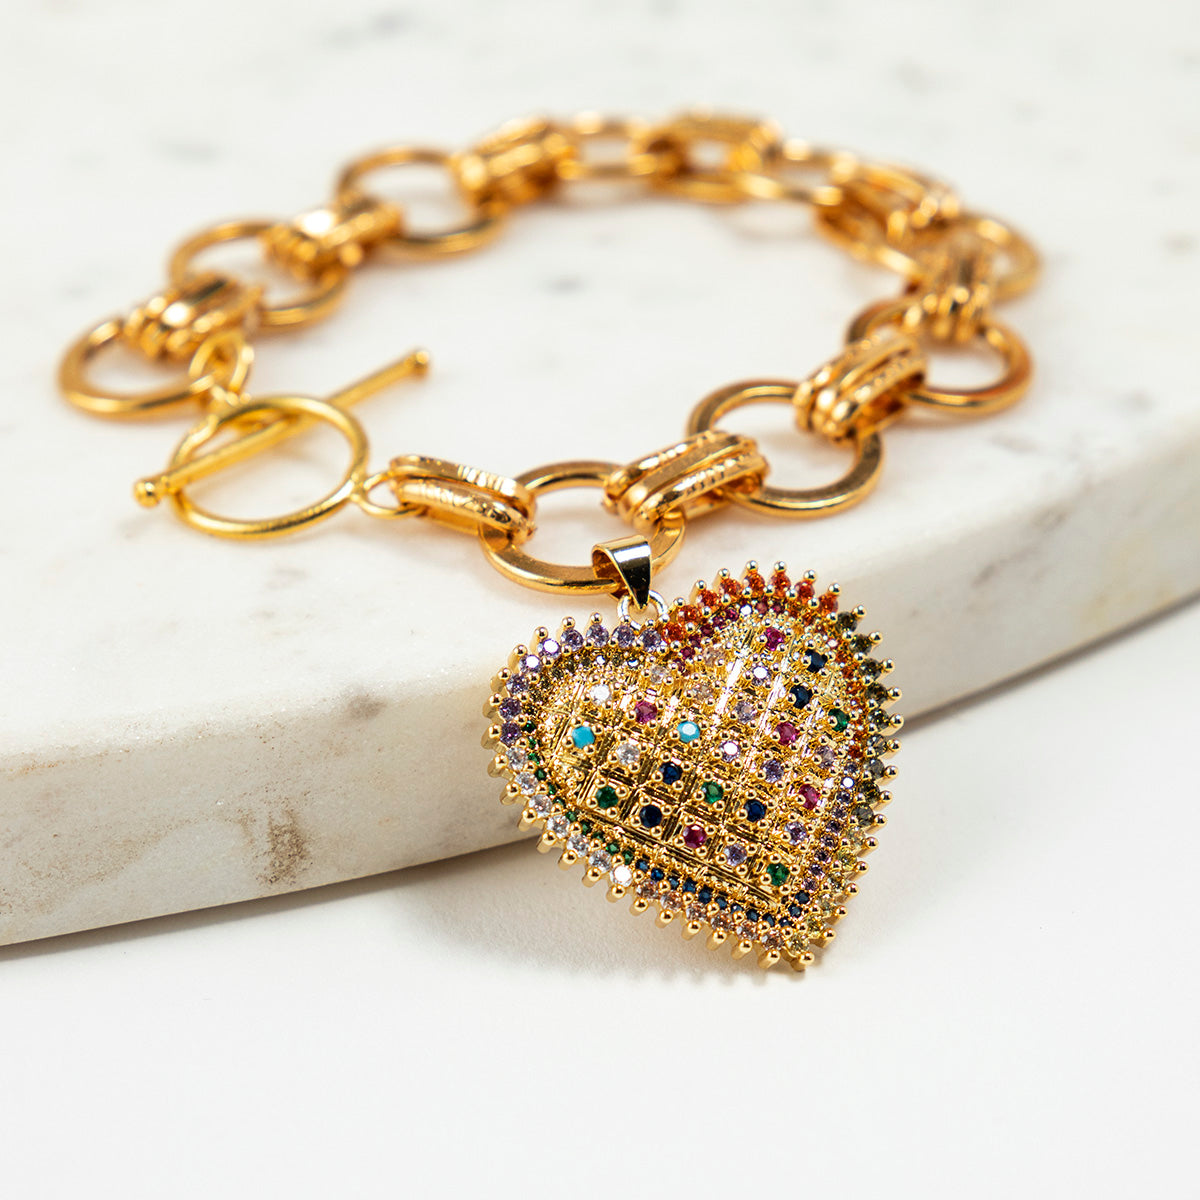 Katerina Psoma Gold Plated Bracelet with Charm heart 